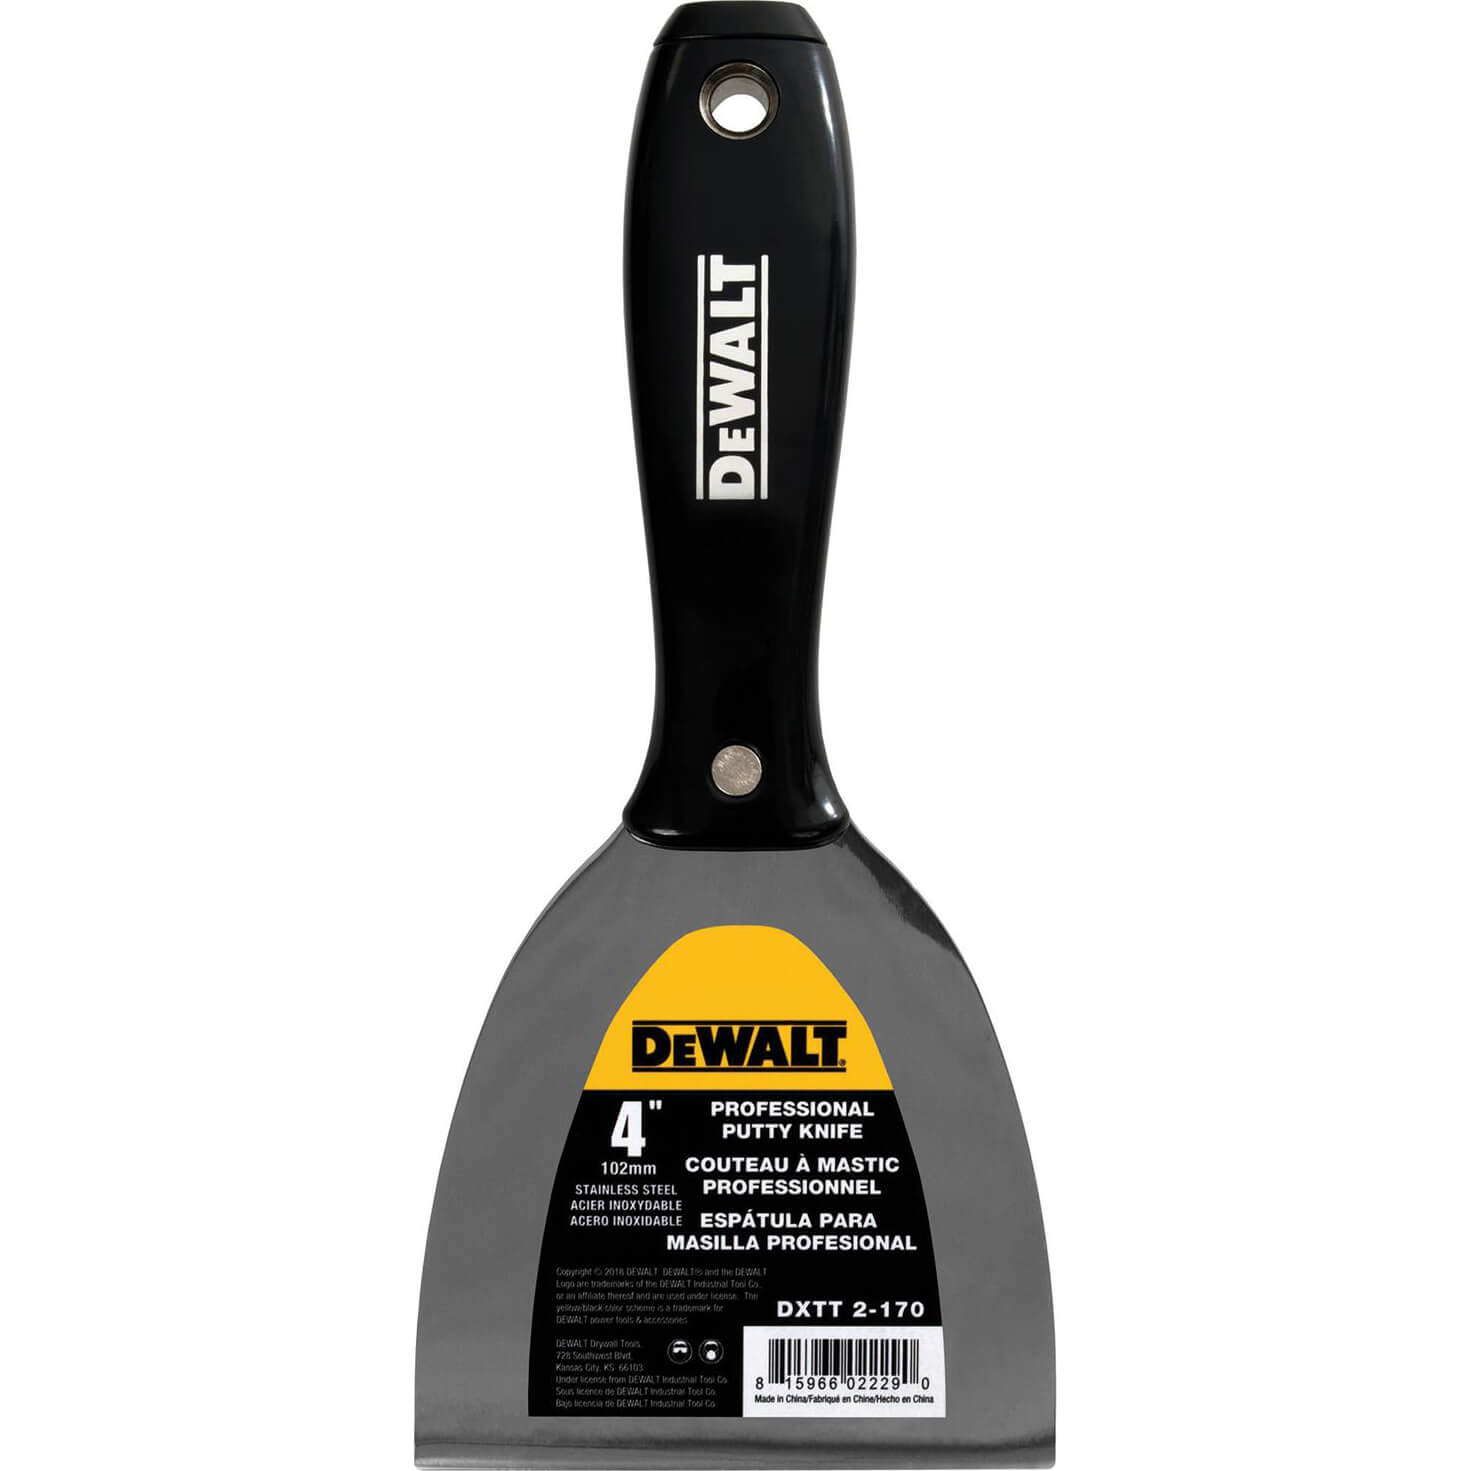 Photo of Dewalt Dry Wall Jointing And Filling Knife 100mm